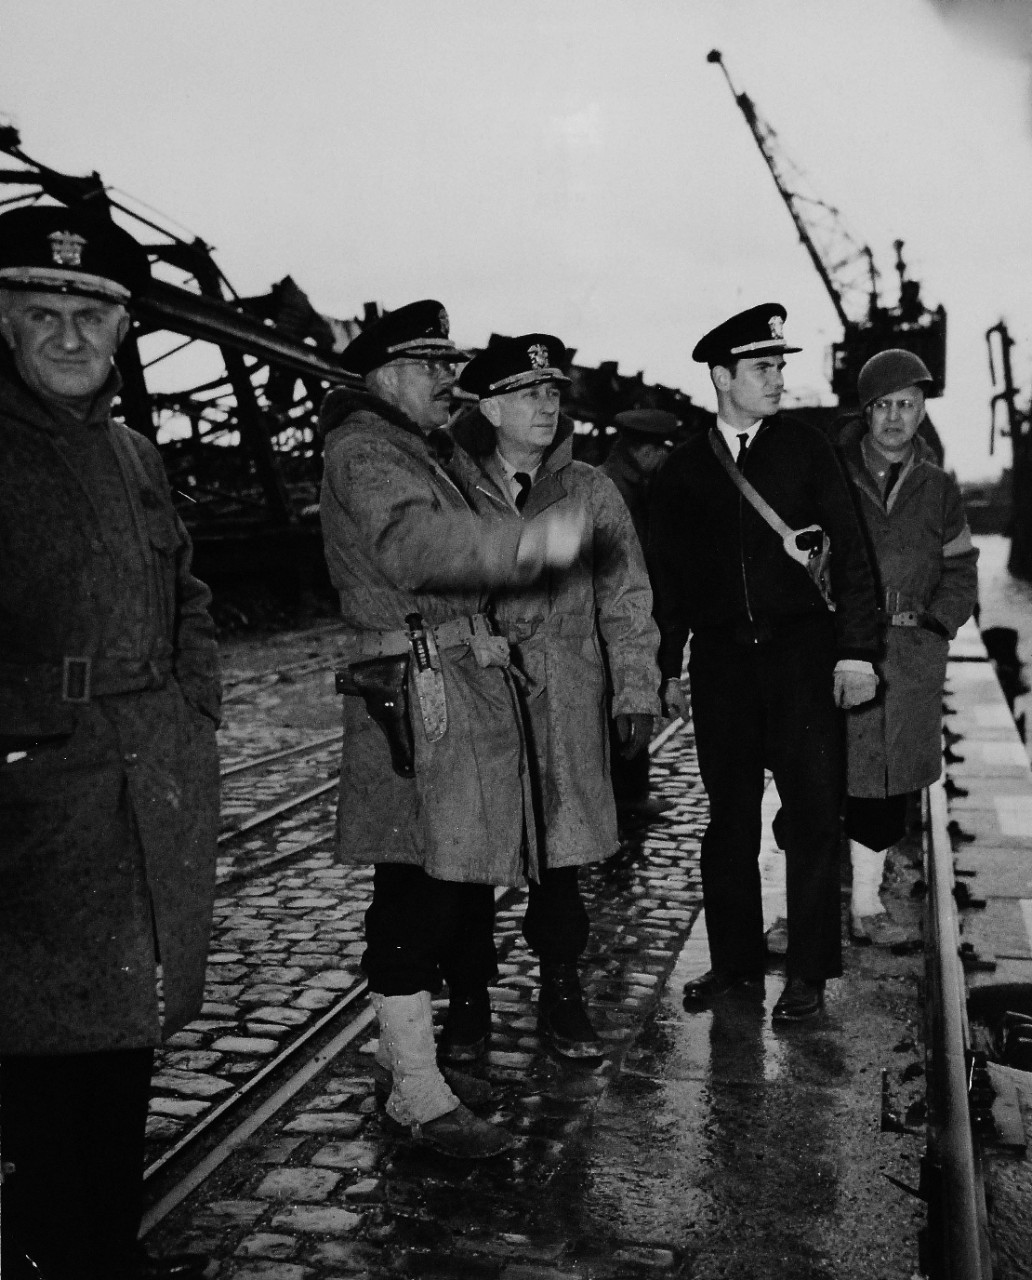 80-G-49281:   U.S. Navy in Germany, 1945.   Transported 400 miles across Europe by U.S. Army, a force of Naval Officers and men take over administration of port activities of Bremen, Germany.   Damaged but readily repairable facilities are inspected by command staff of U.S. Navy.  Captain V.H. Coufrey points out salient features of Europe Hafen Docks to Rear Admiral Arthur G. Robinson.   Photograph released May 29, 1945.   Official U.S. Navy photograph, now in the collections of the U.S. Navy.   (2014/12/02).   